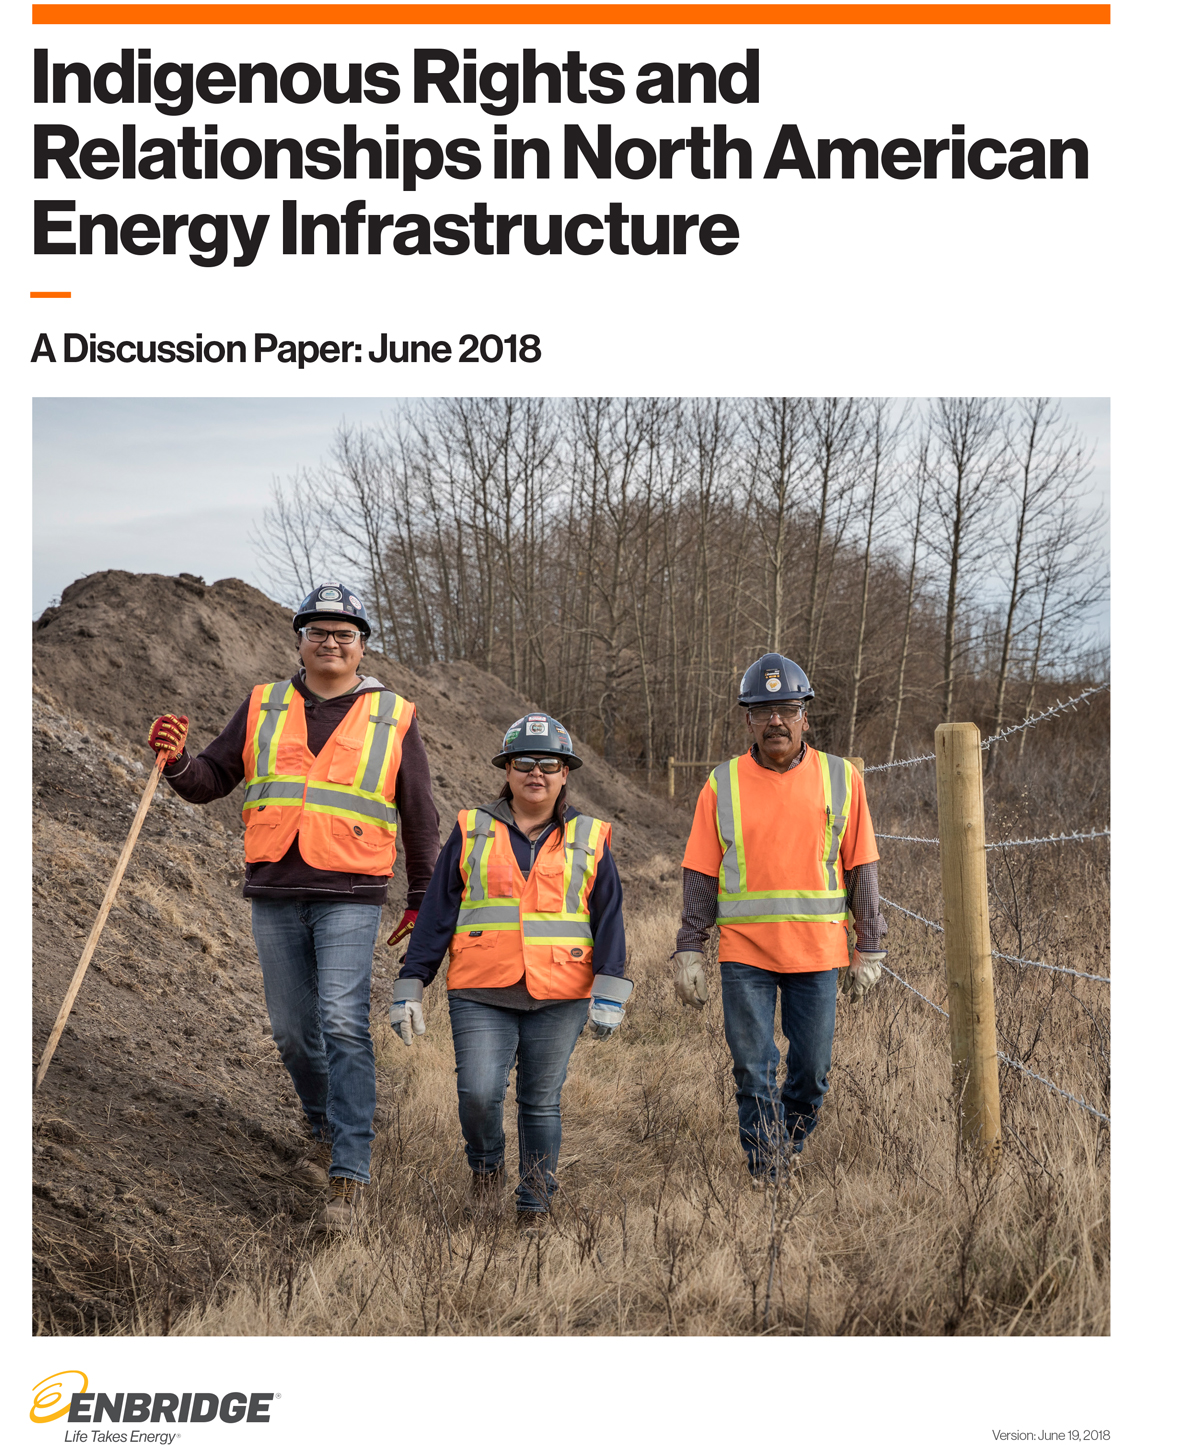 Indigenous Rights and Relationships in North American Energy Infrastructure